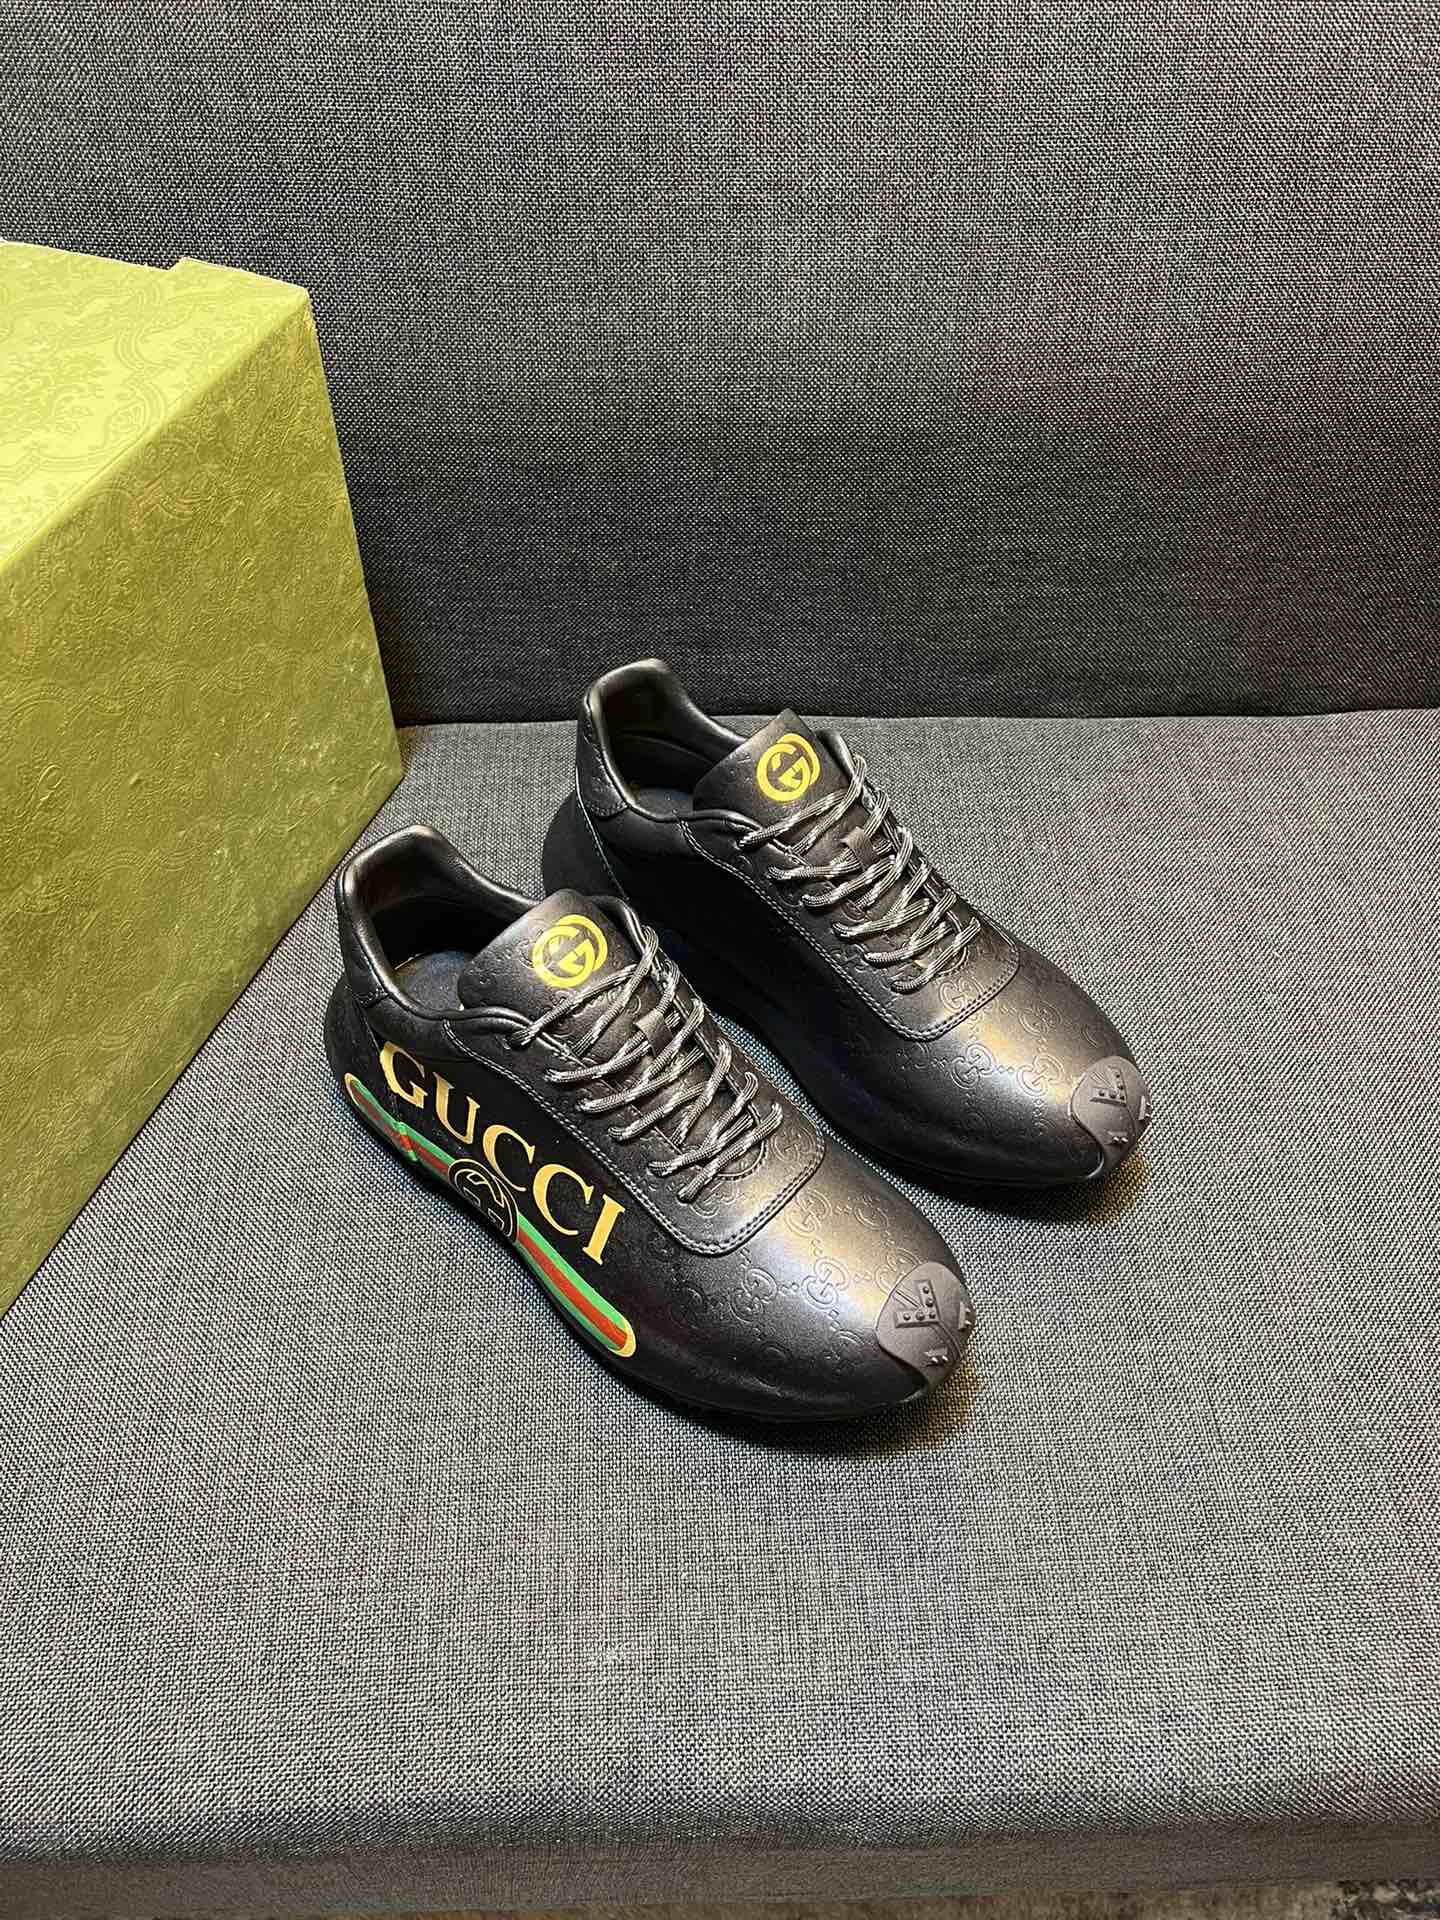 Gucci 7 Star
 Sneakers Casual Shoes Casual